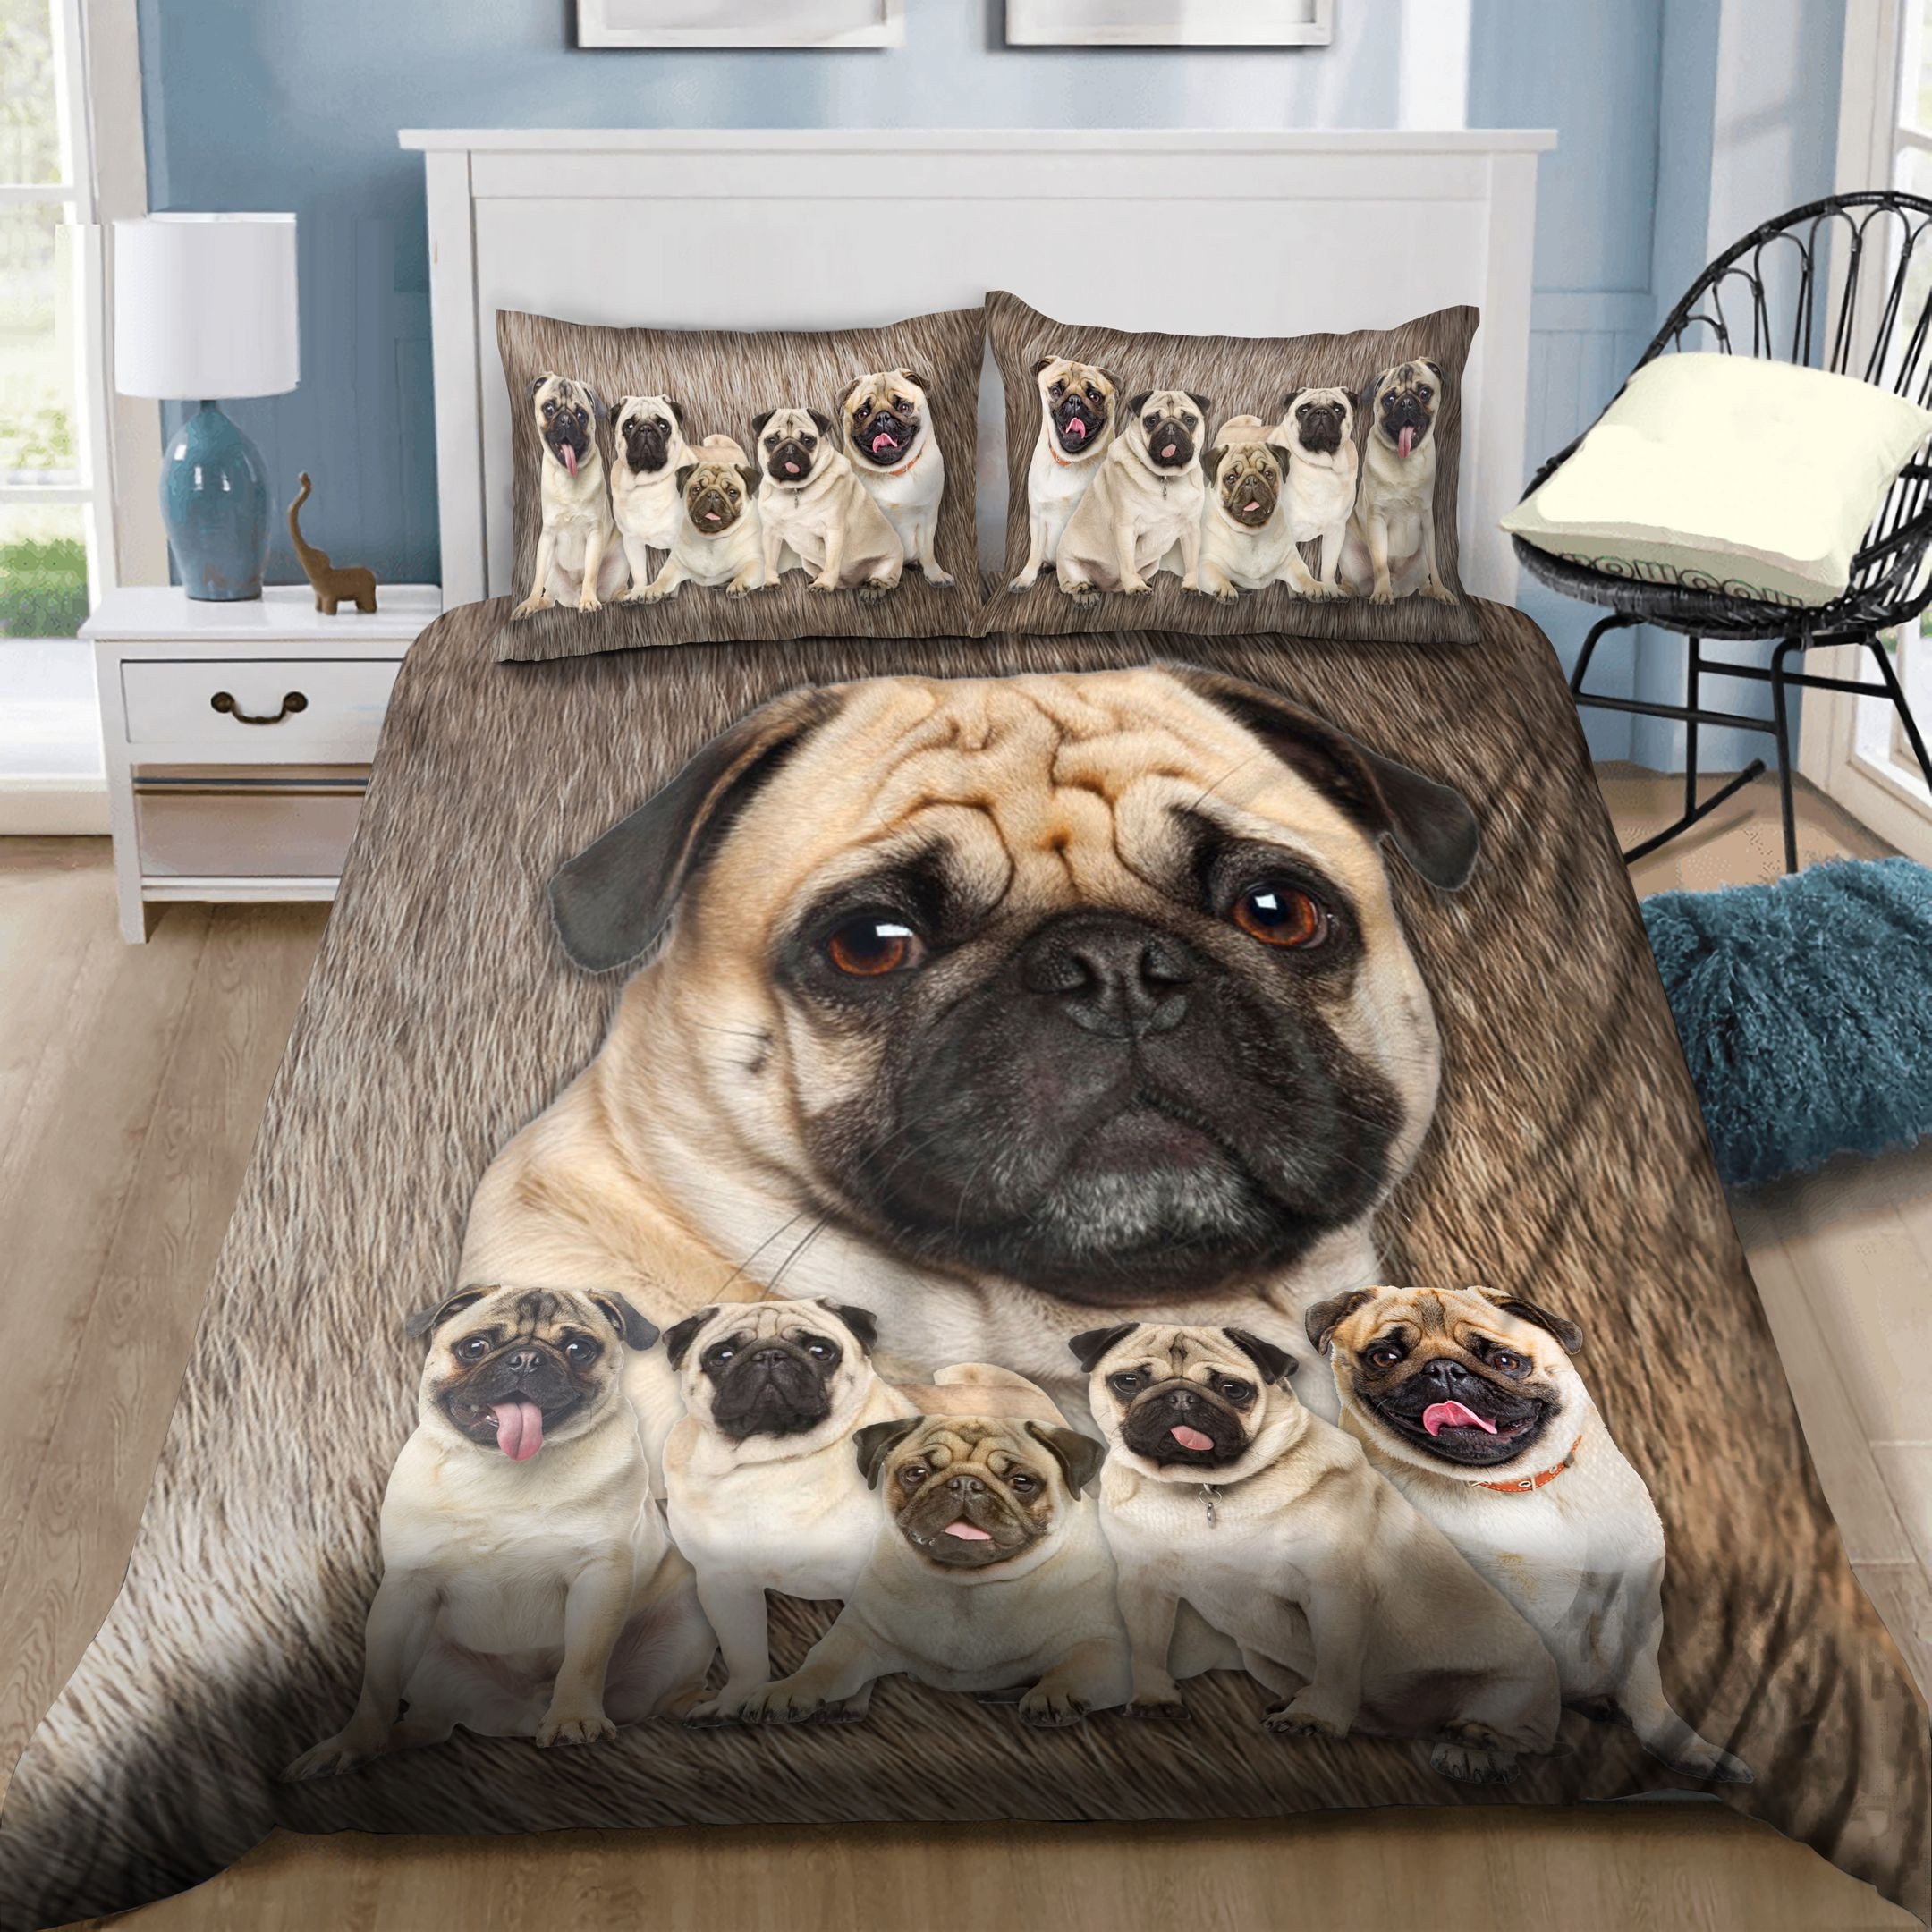 pug dog family bedding set with sheets and duvet cover ialeb